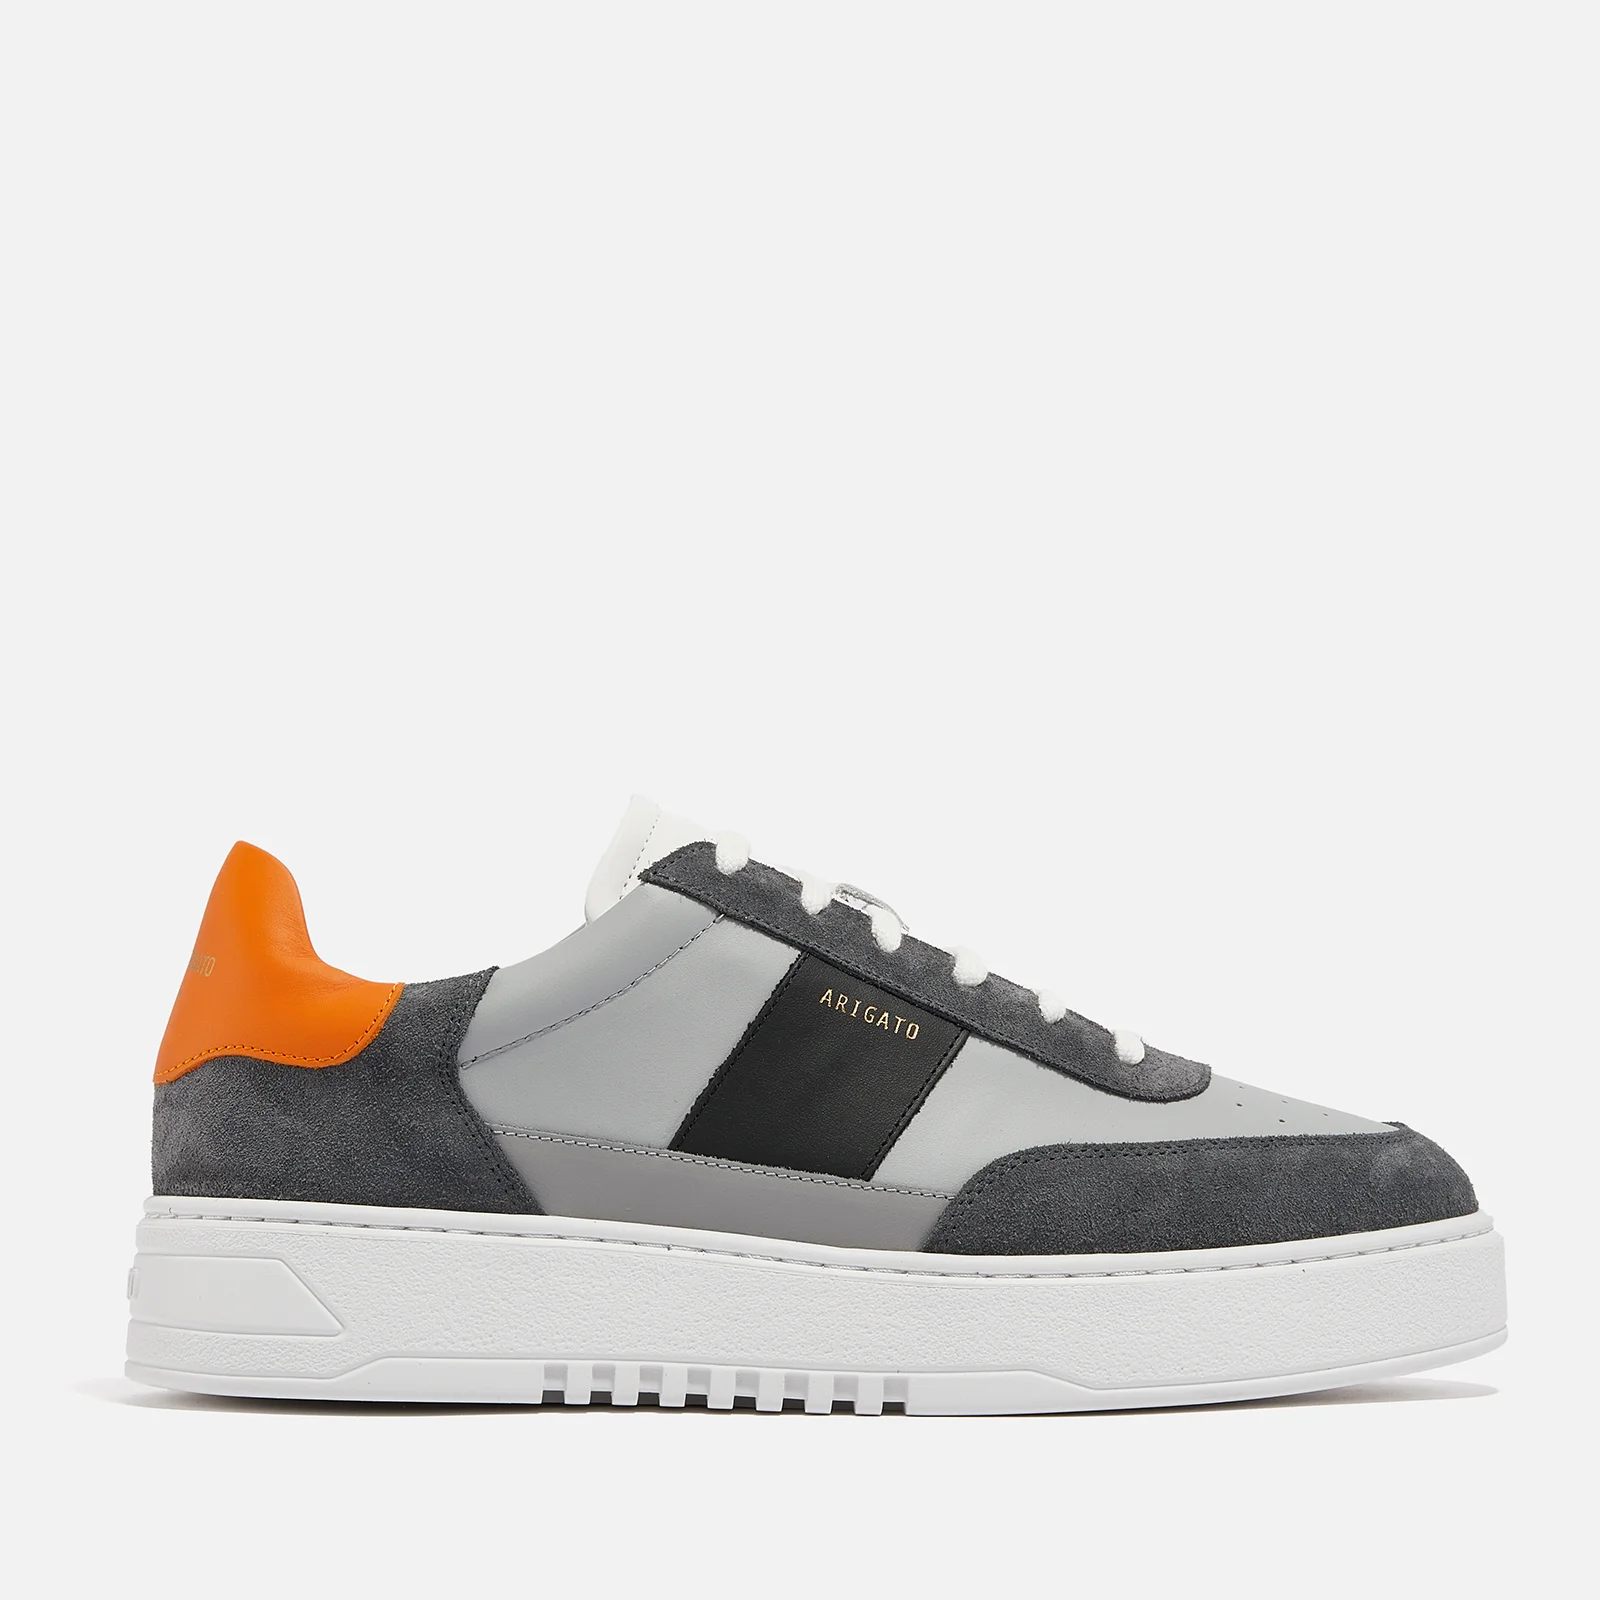 Axel Arigato Men's Orbit Vintage Leather and Suede Trainers Image 1